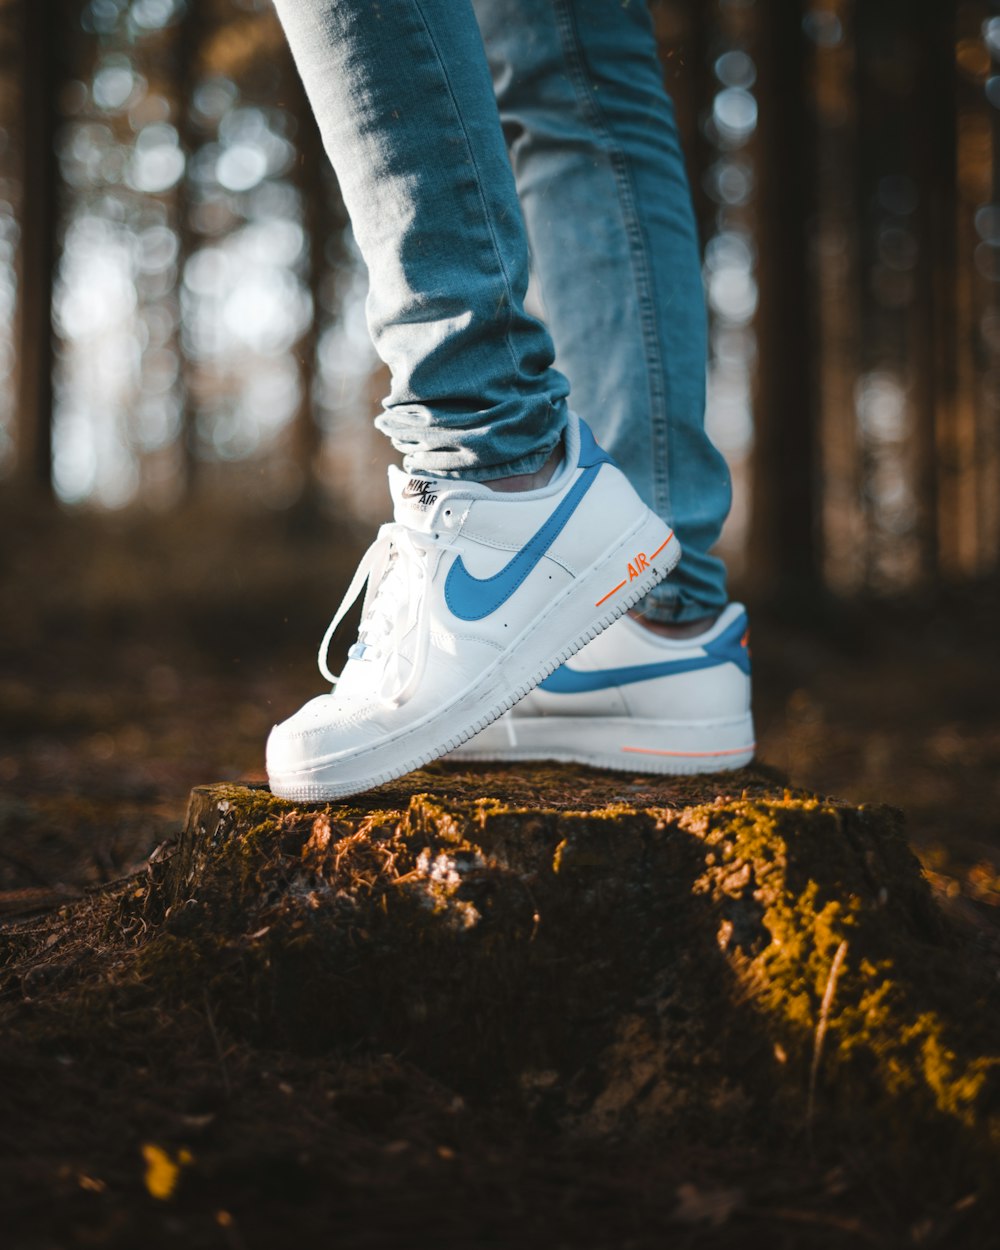 Blue Shoes Pictures | Download Free Images on Unsplash